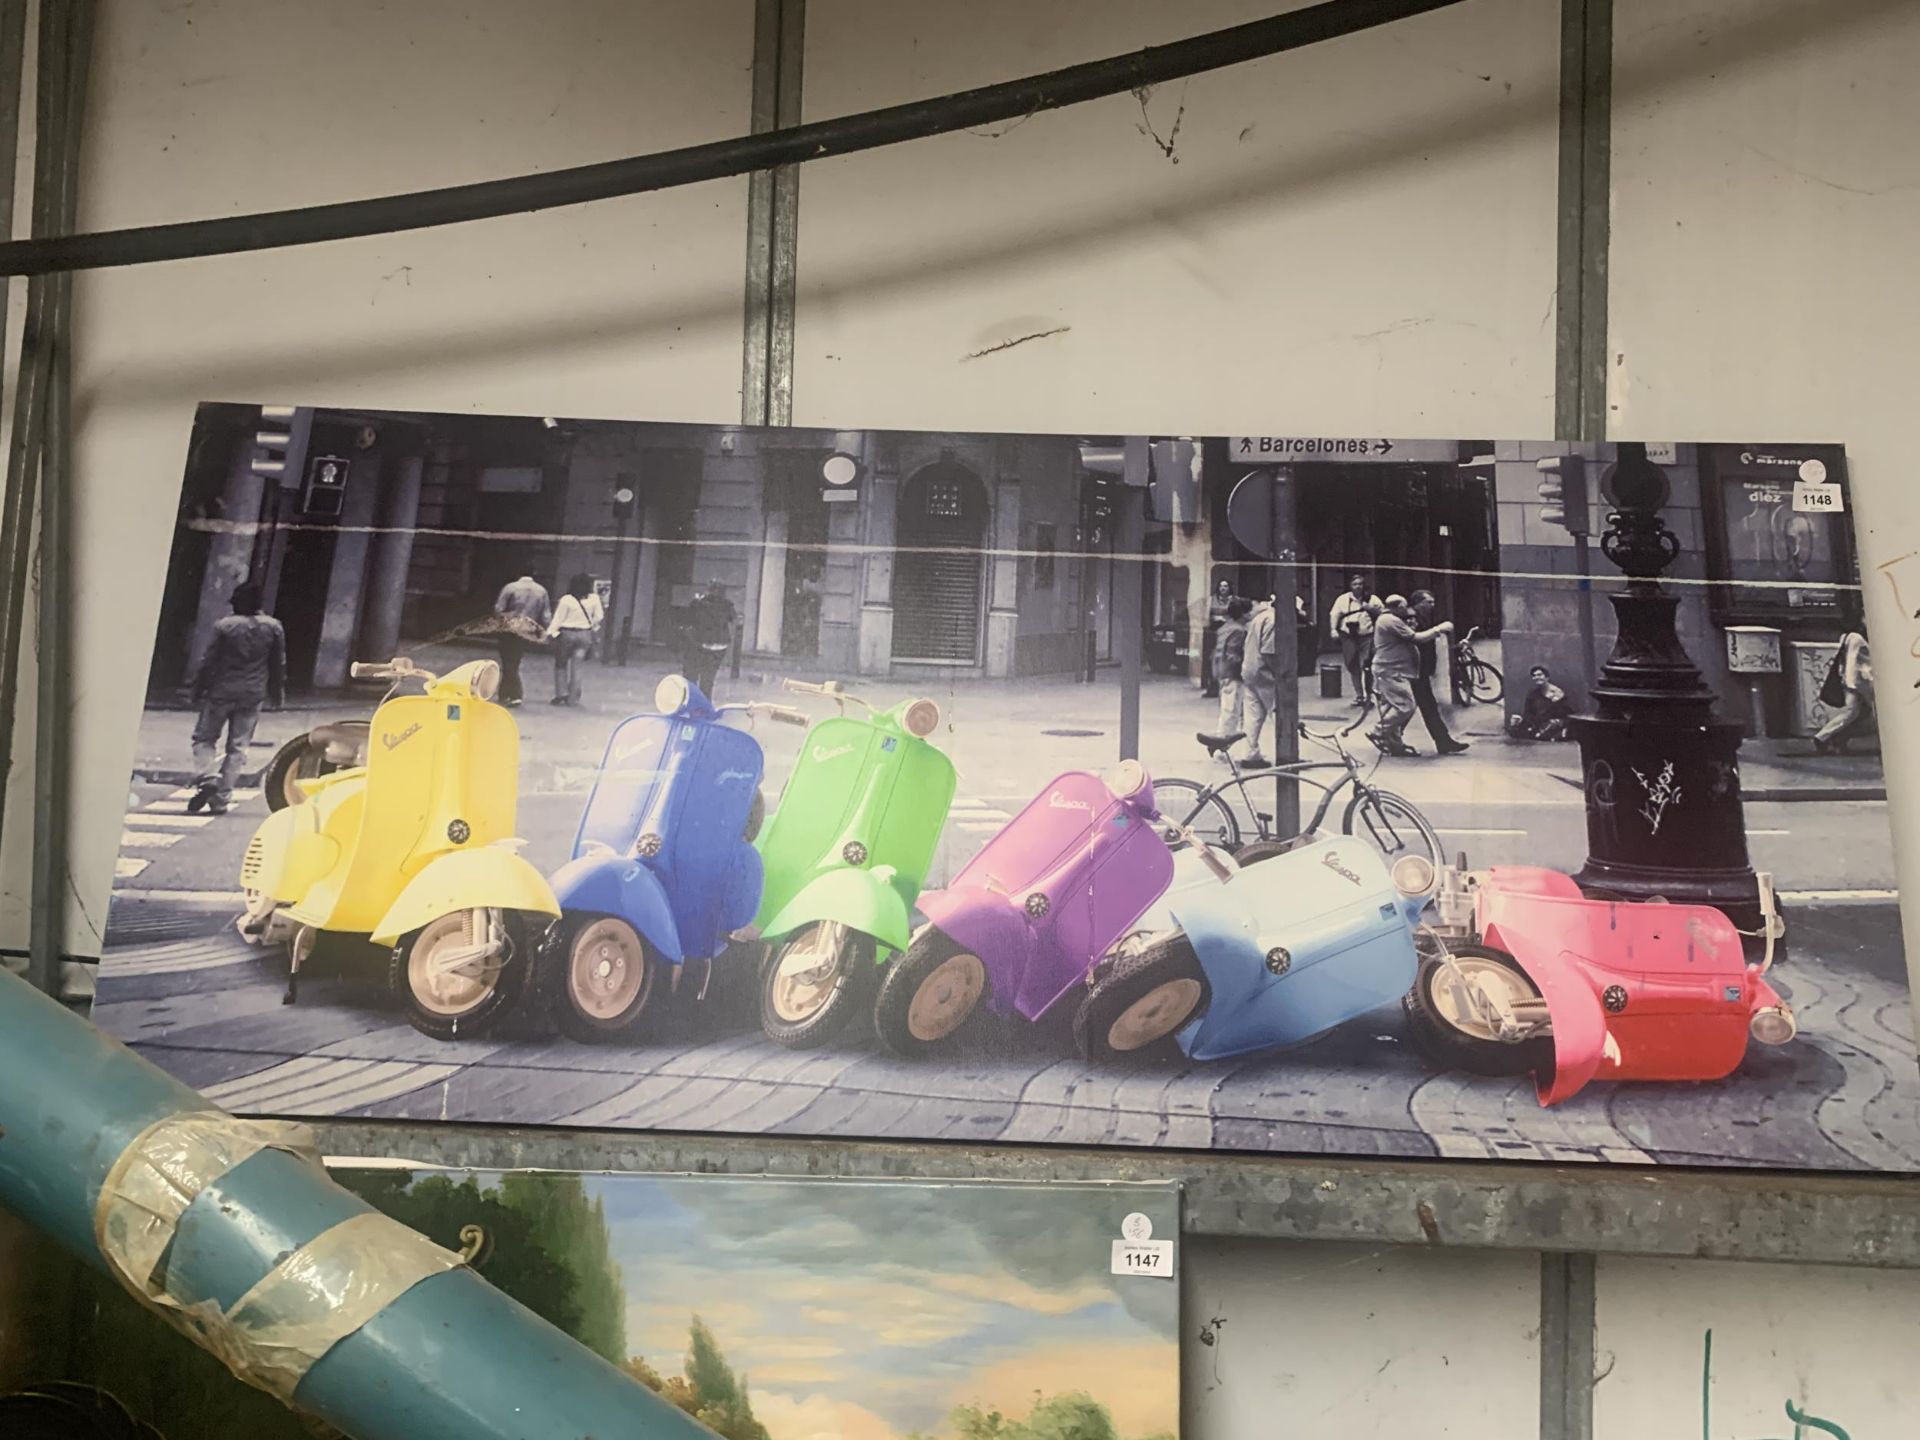 A LARGE CANVAS BOX POSTER OF SIX VESPA SCOOTERS, 48" X 20"